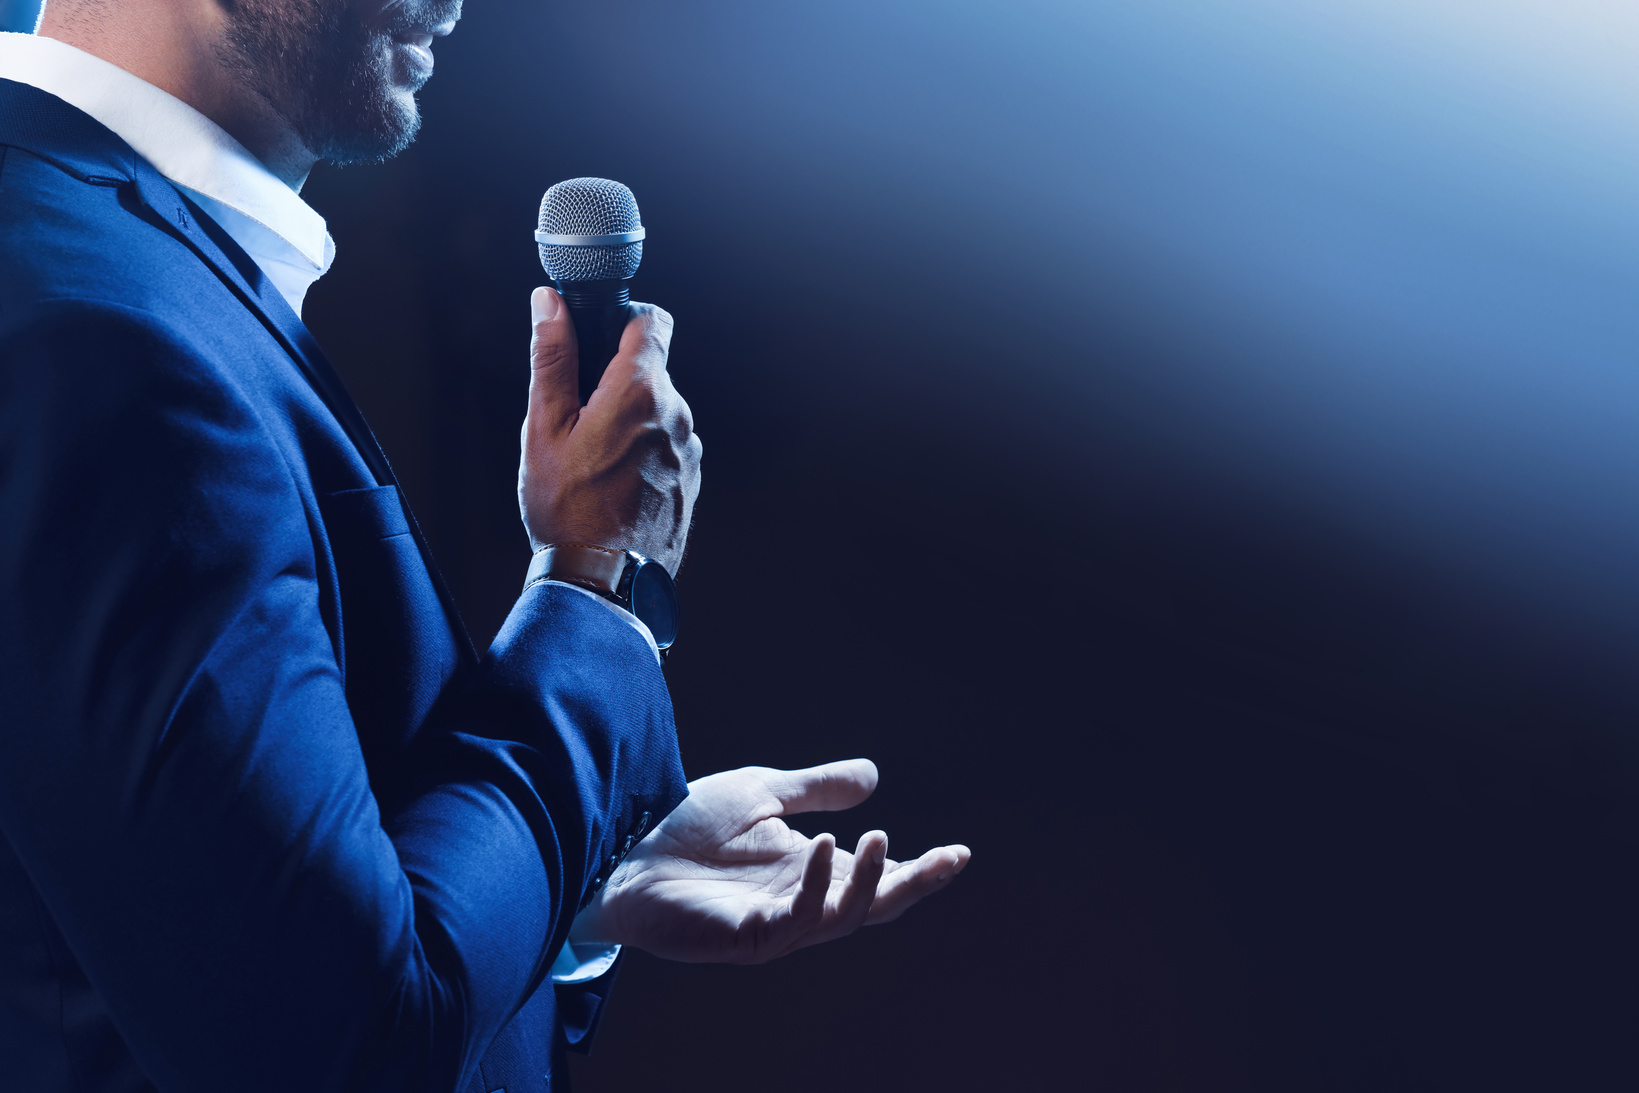 Motivational Speaker with Microphone Performing on Stage, Closeu